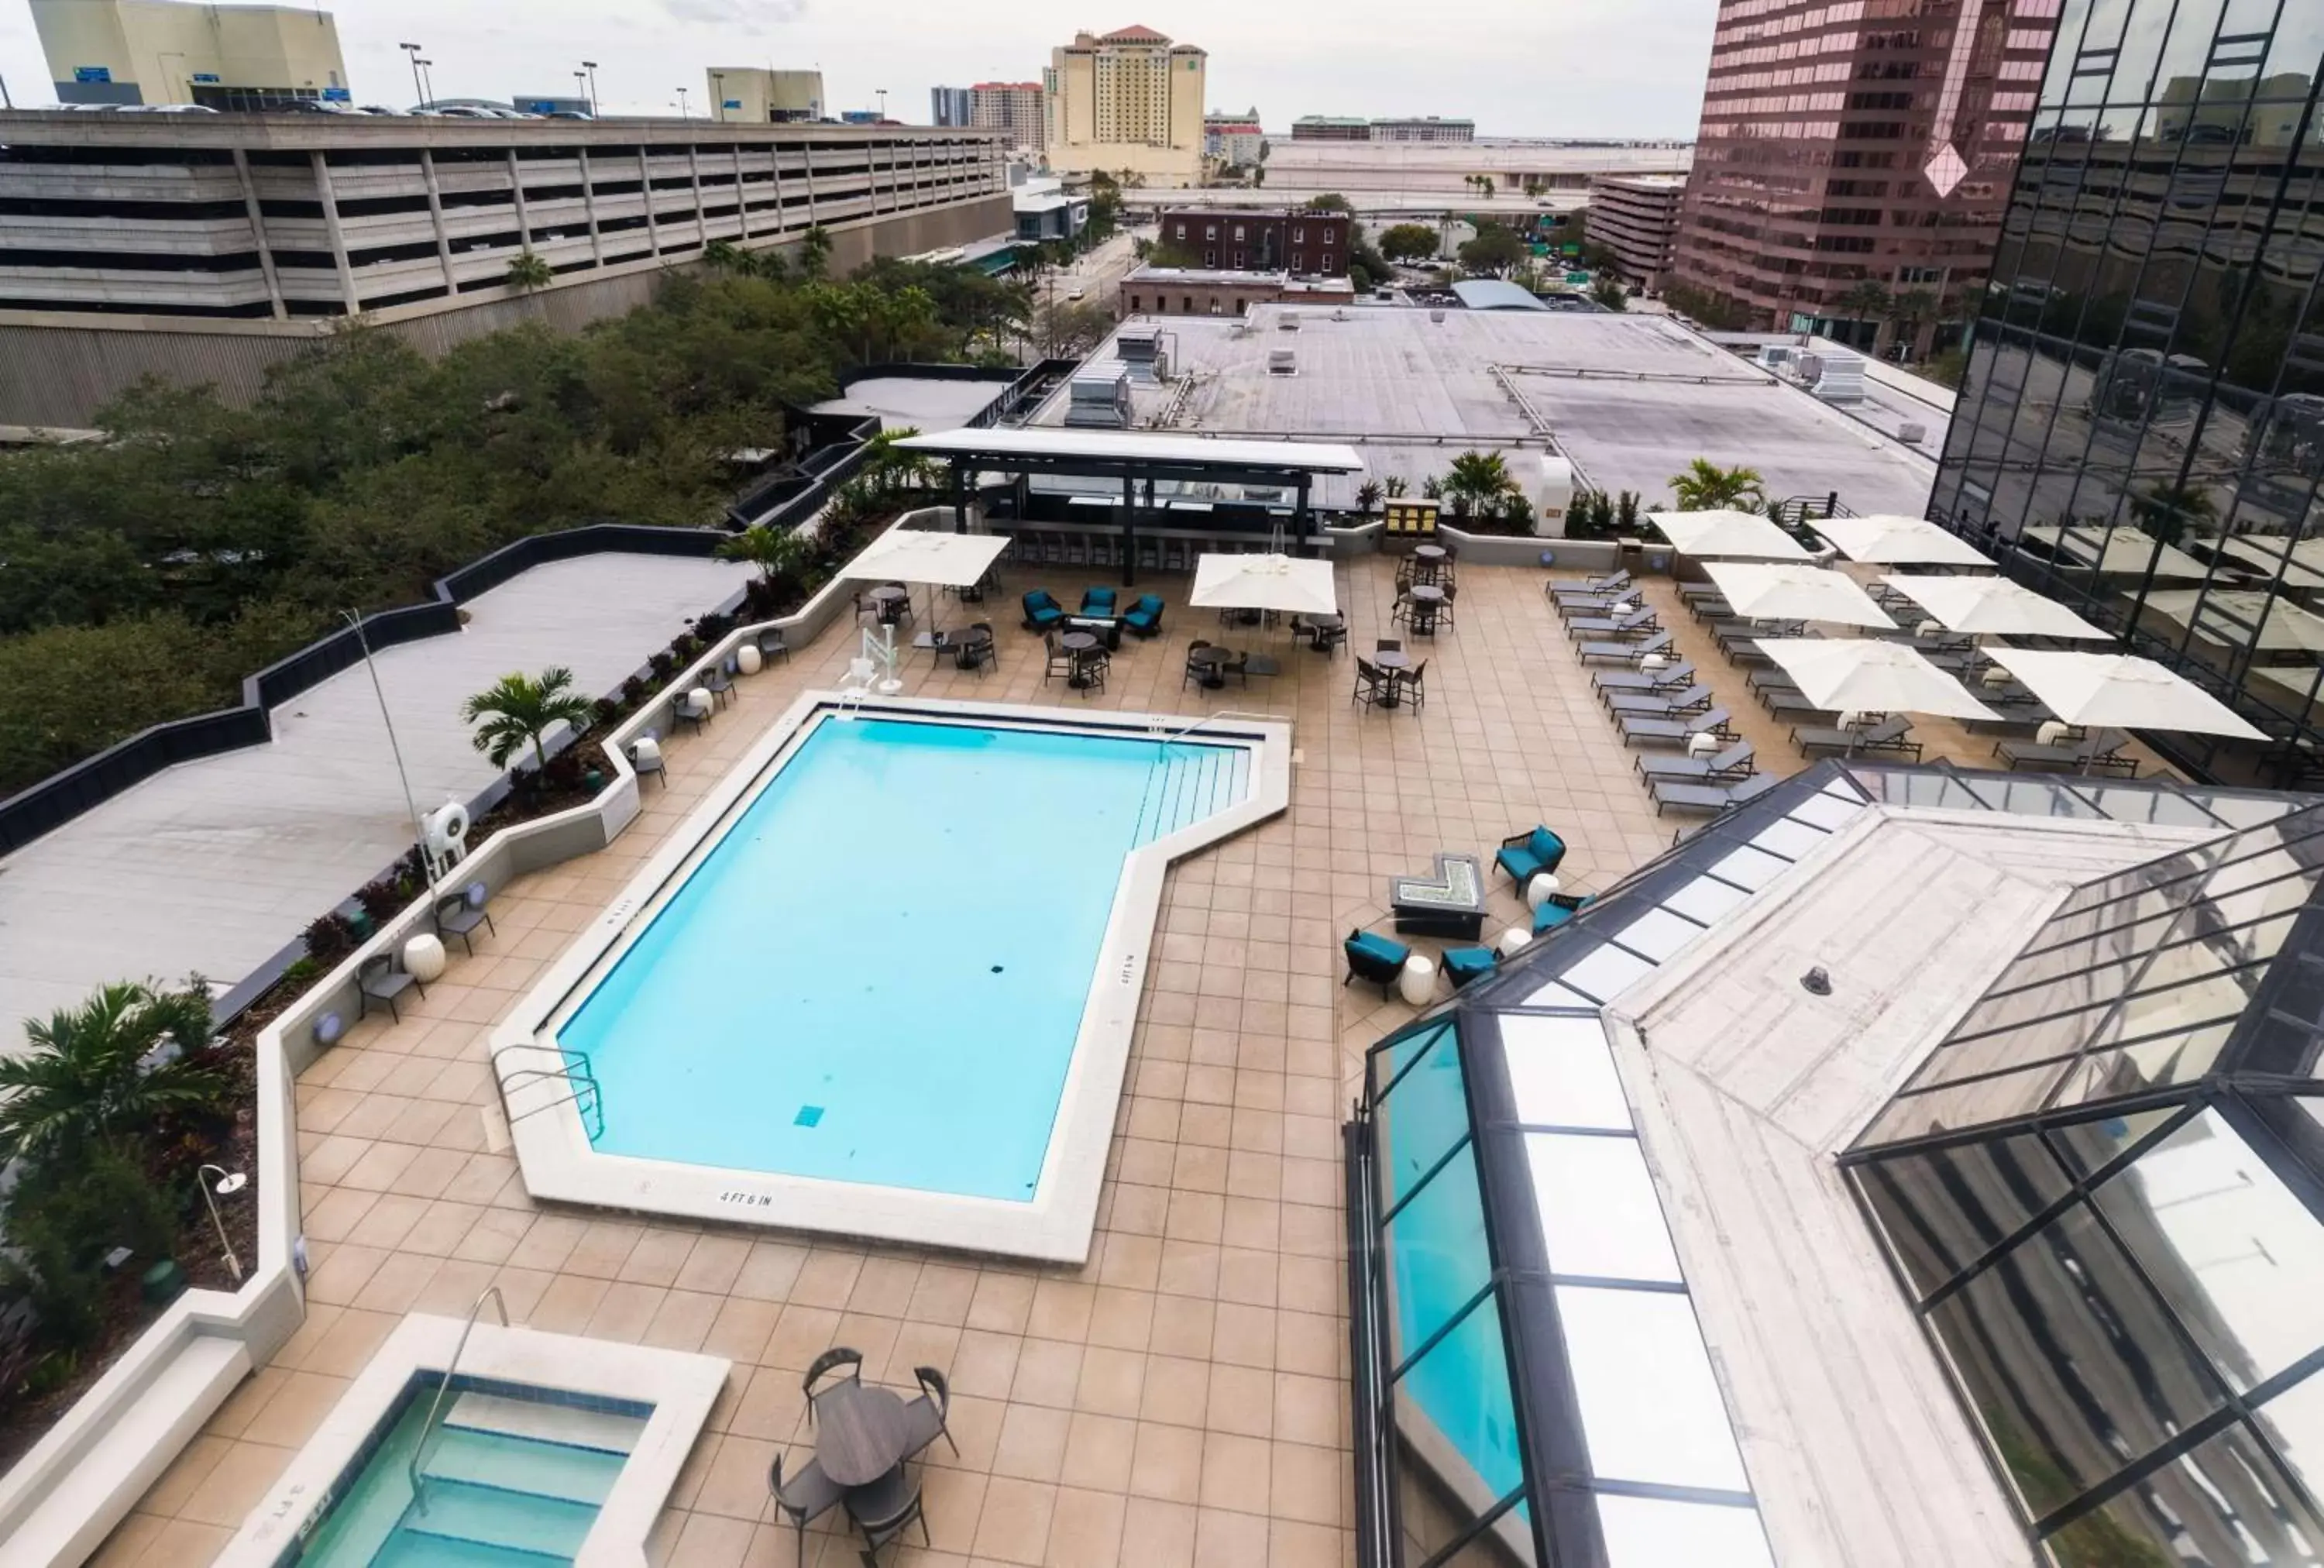 Property building, Pool View in Hilton Tampa Downtown